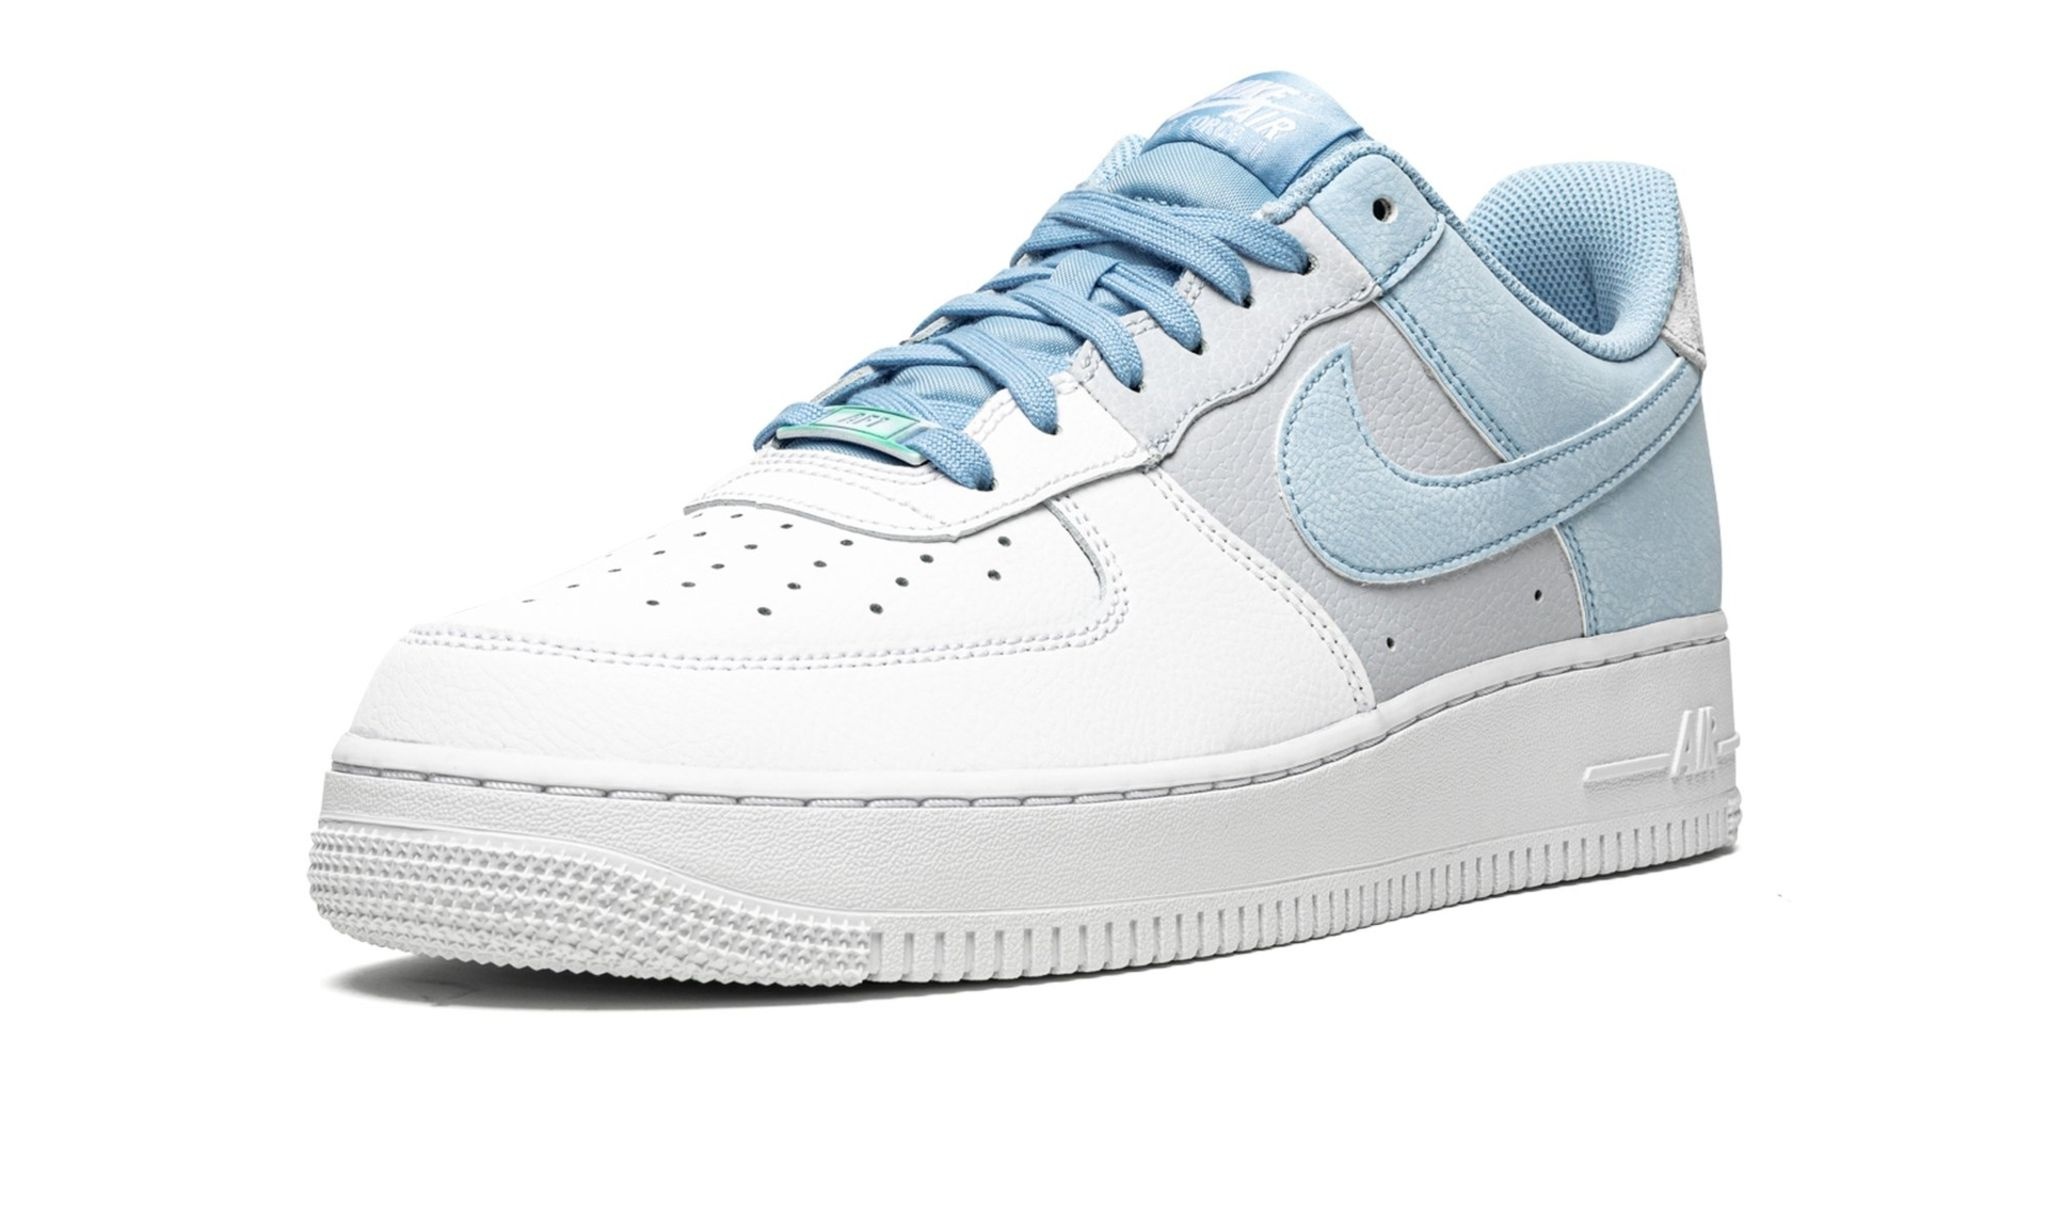 Air Force 1 '07 LV8 "Psychic Blue" - 4